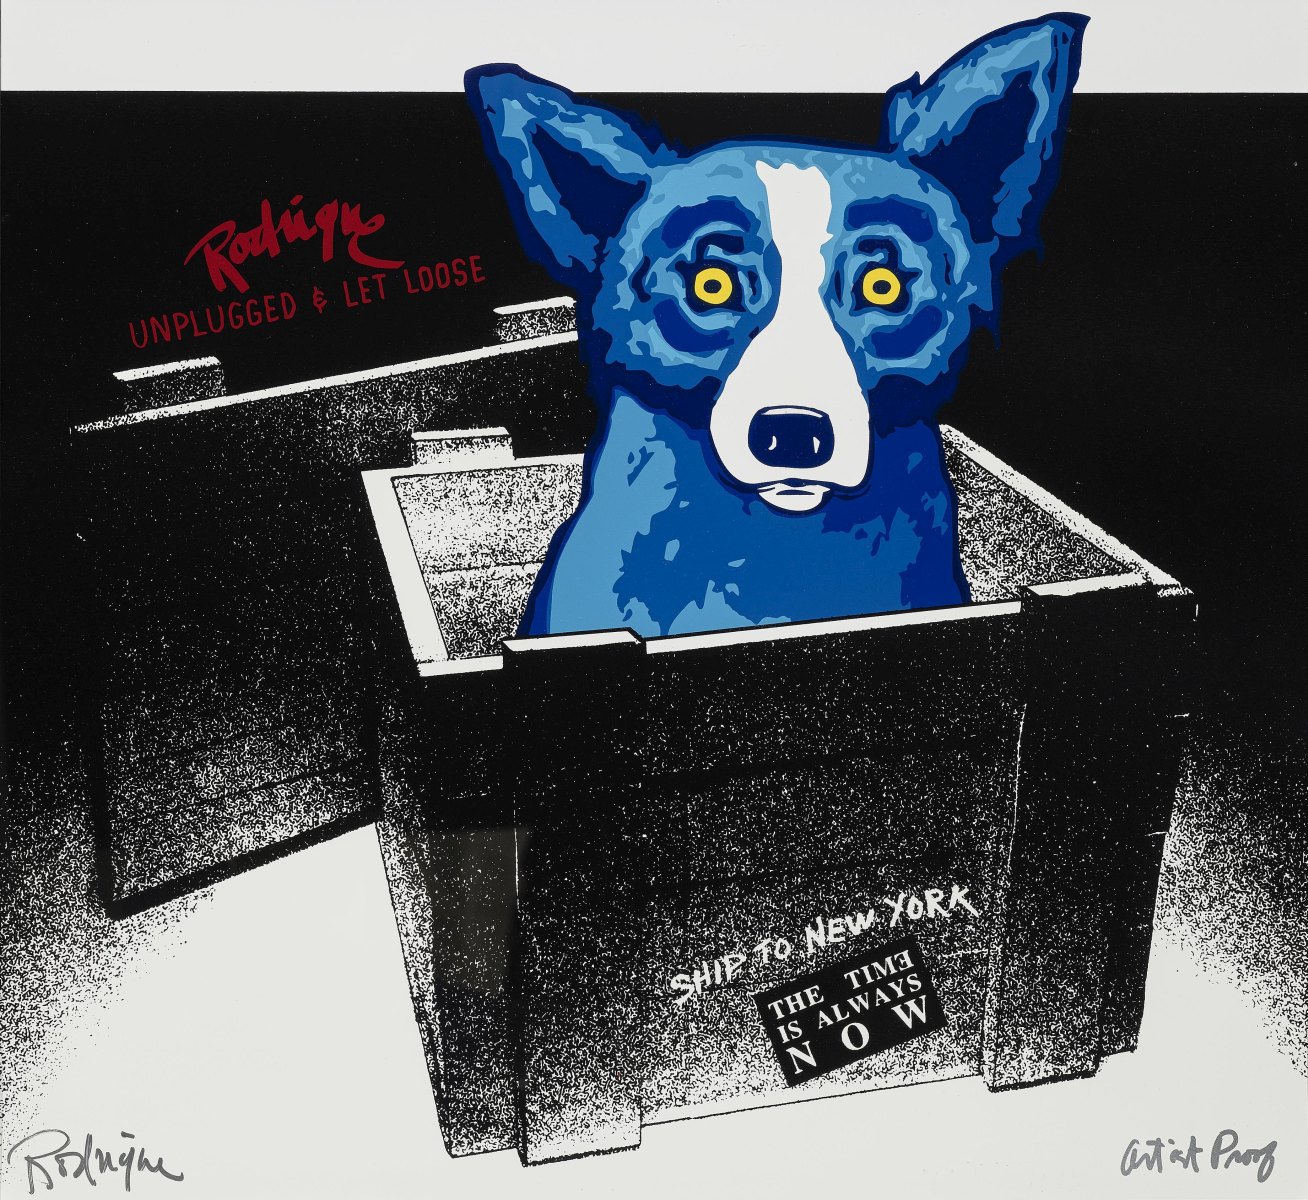 Rodrigue, GeorgeUnplugged And Let Loose (Ship to New York). 1995 Colour serigraph on white thin